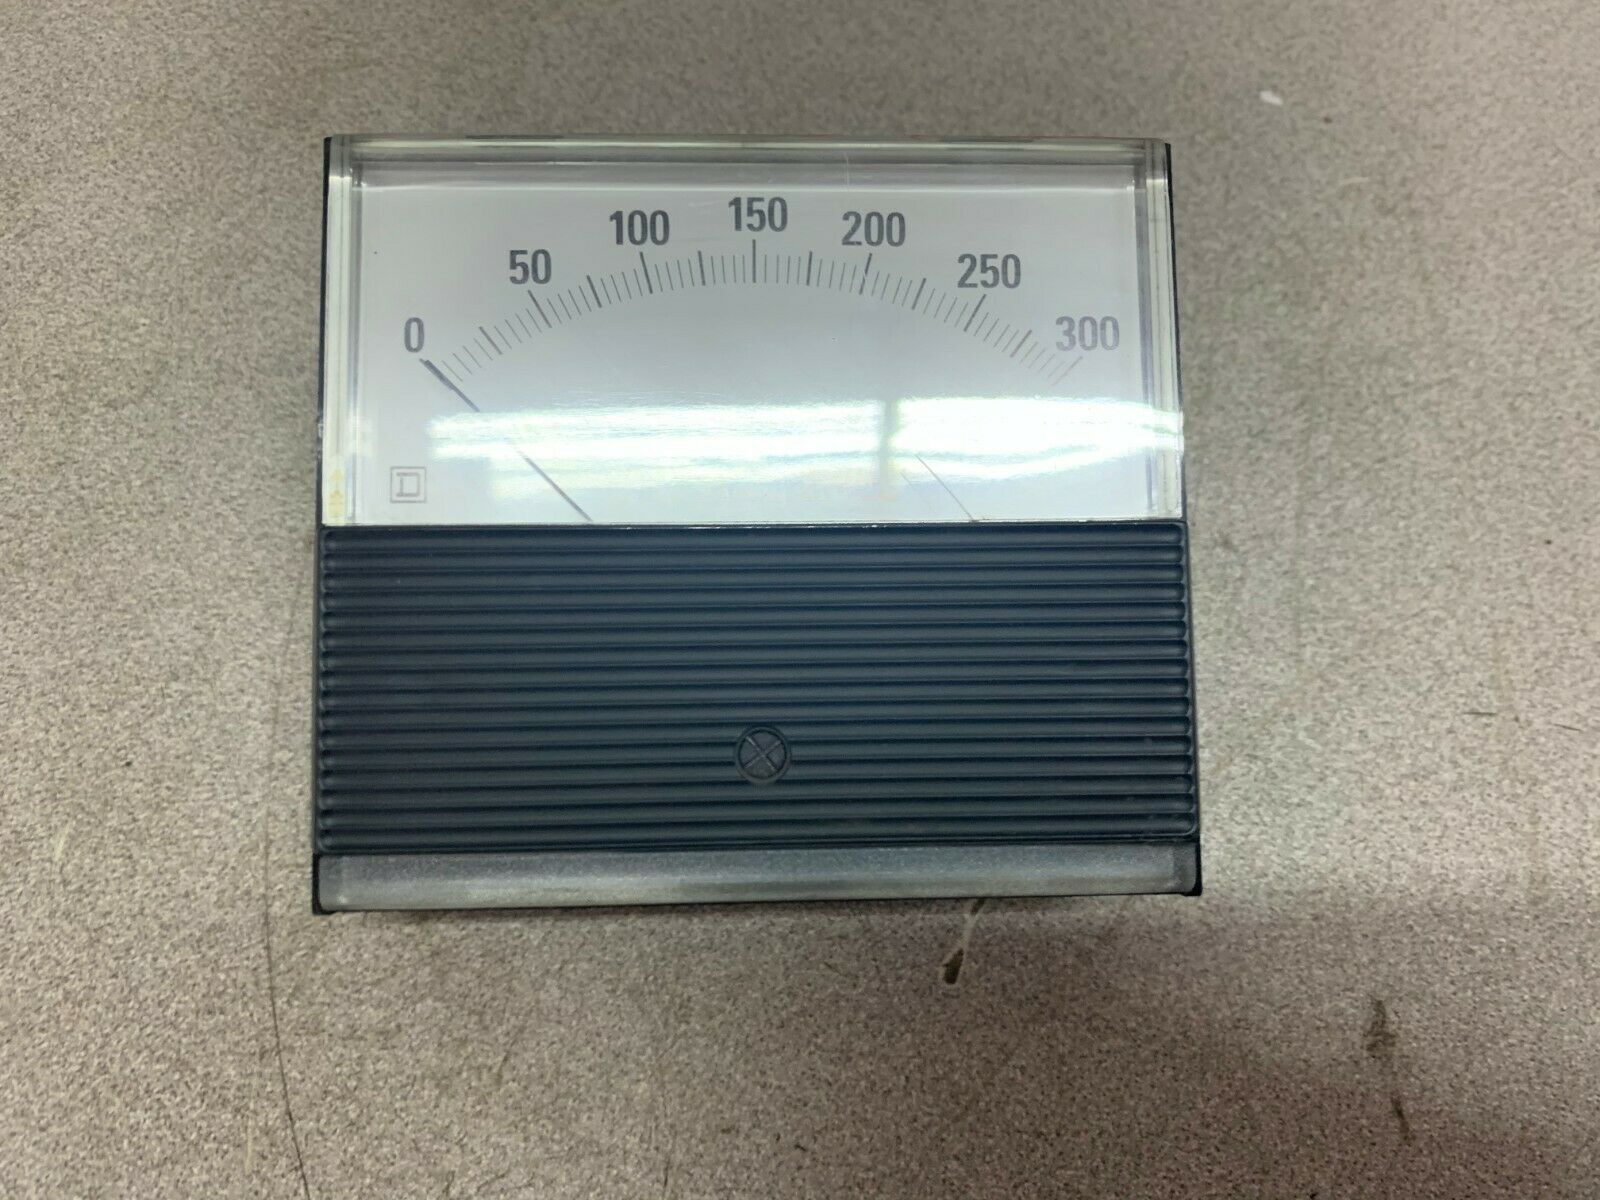 NEW NO BOX SQUARE D 0-300 AMP METER CLE8-A4D301